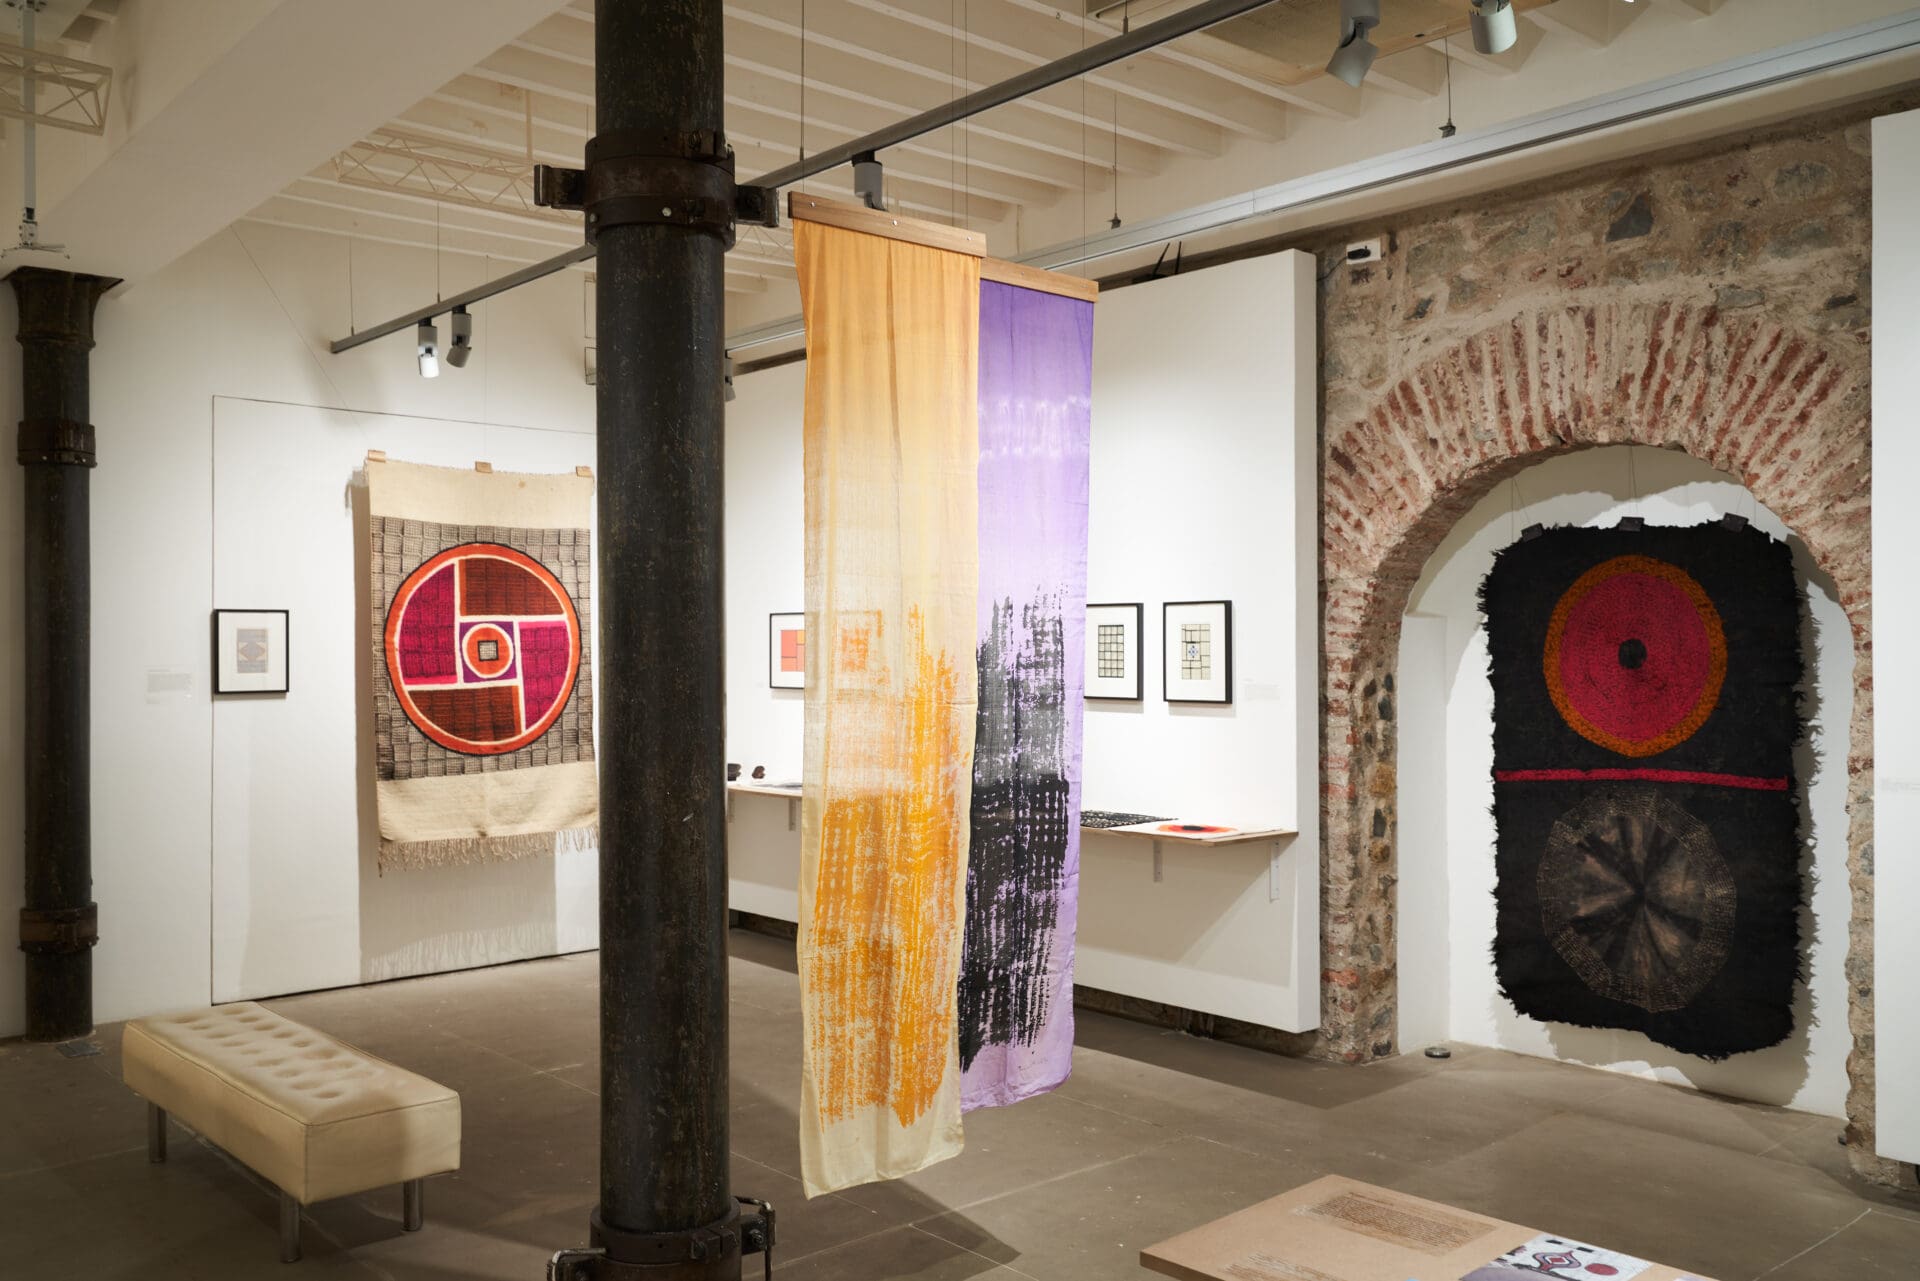 Best galleries in Mumbai | An installation view at Chatterjee & Lal in Mumbai, featuring hanging tapestries and a brick archway.